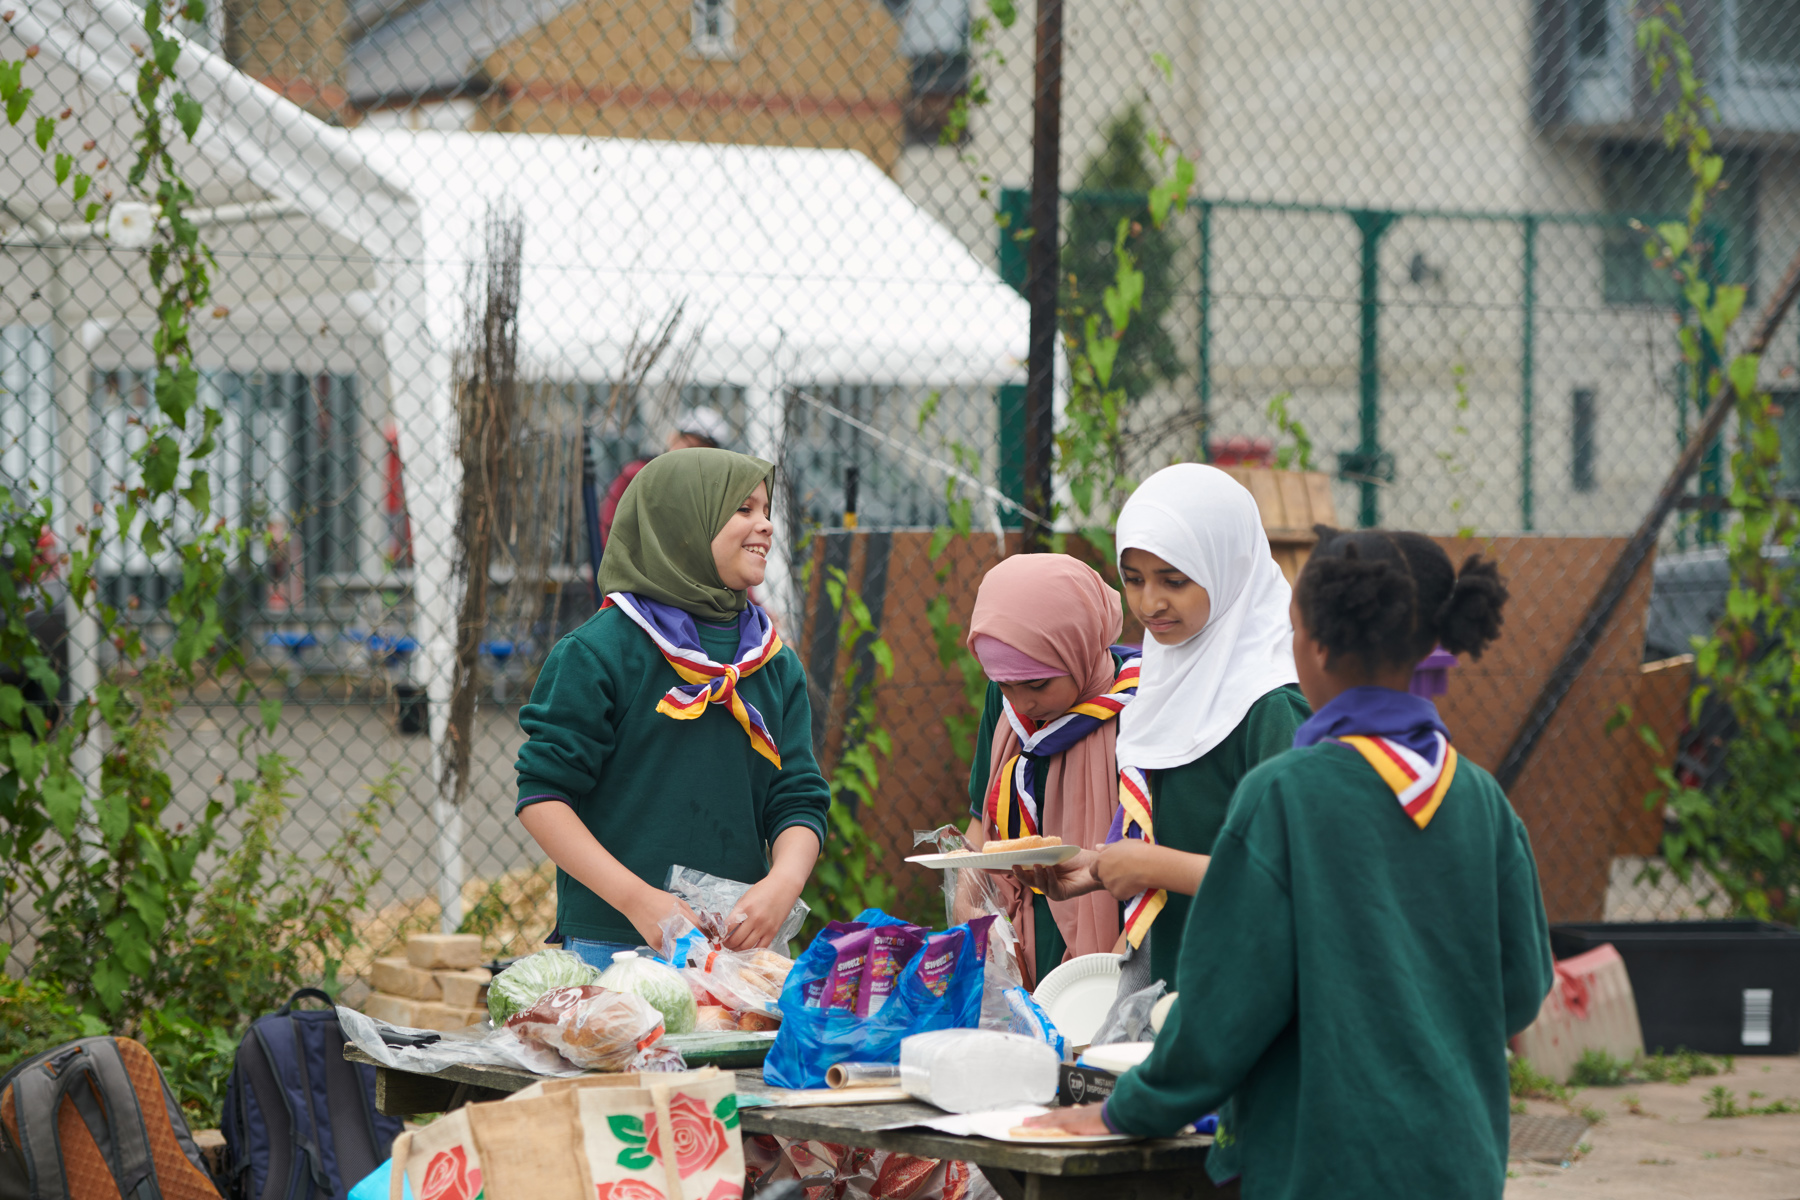 A group of young Muslim Scouts are wearing their uniform and neckers. One Cub on the left is looking at the others to the right and smiling, with the other three looking down at the food on a table outside. They're stood in front of a fence and there's bread, carrier bags, lettuce and other packets of food on the table. Around the table is a shopping bag and a few backpacks.